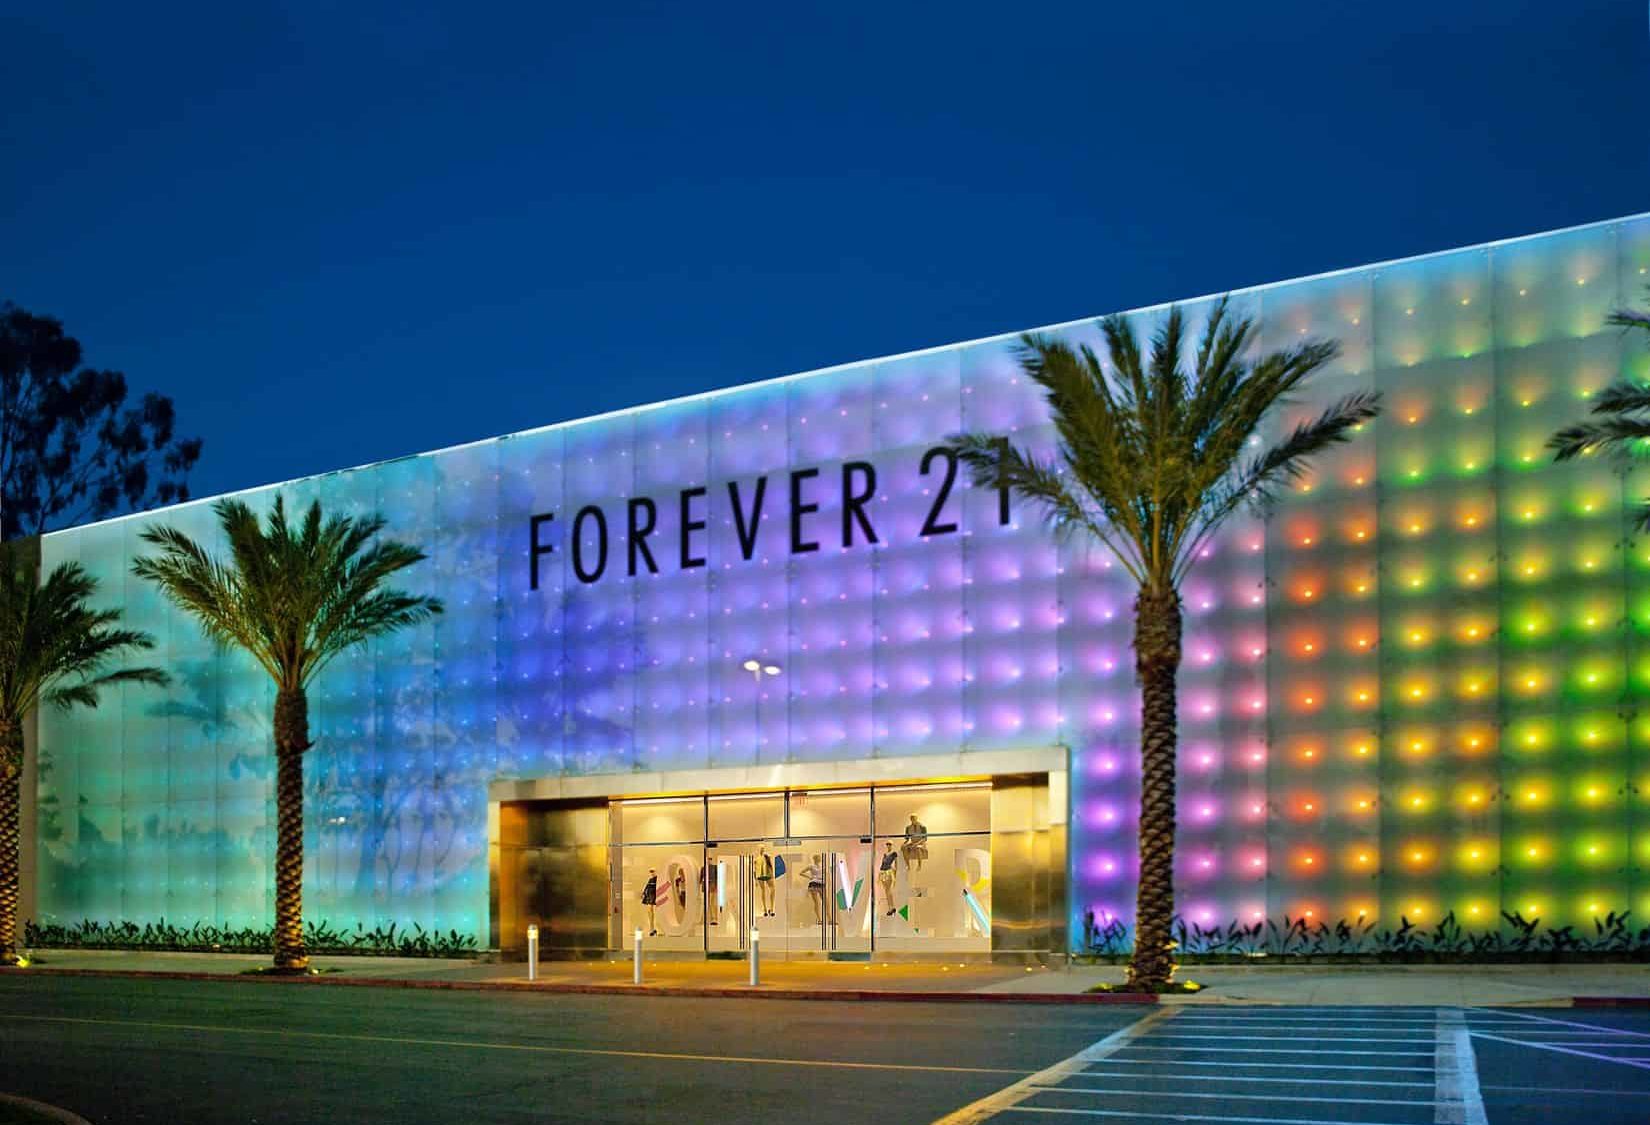 Forever 21 pulls out of China